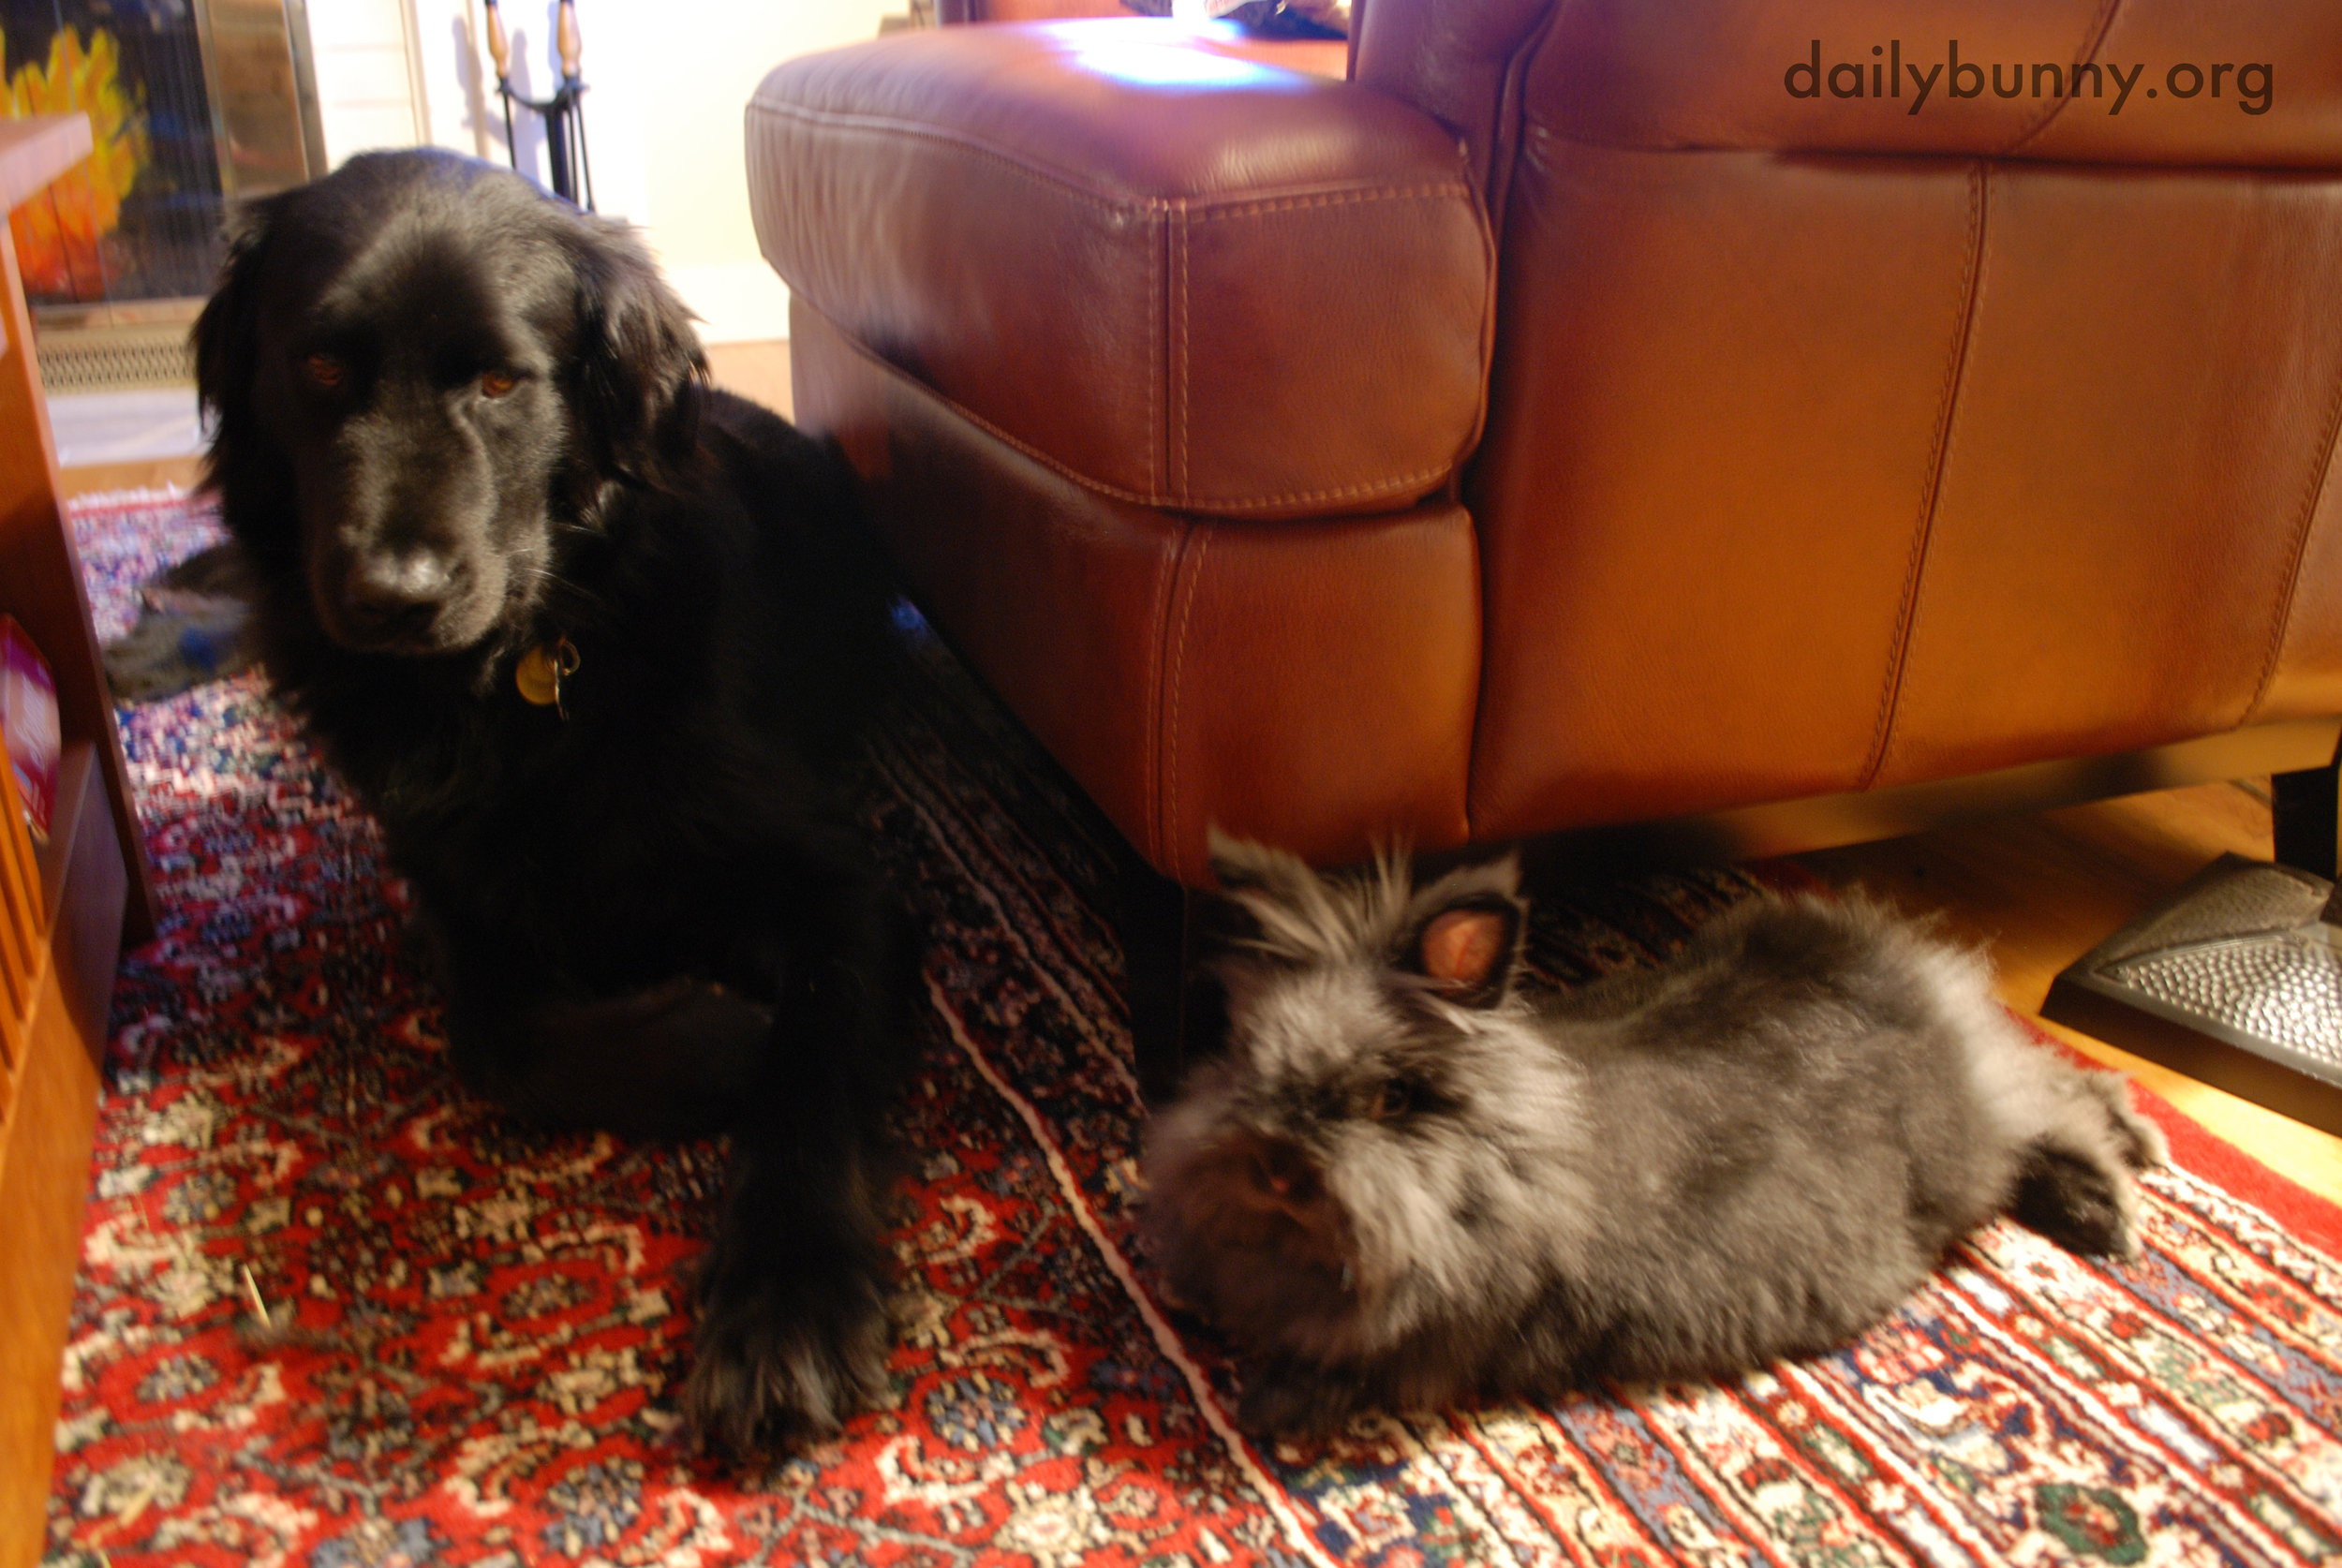 Bunny and His Dog Friend Retire to the Living Room to Relax and Socialize